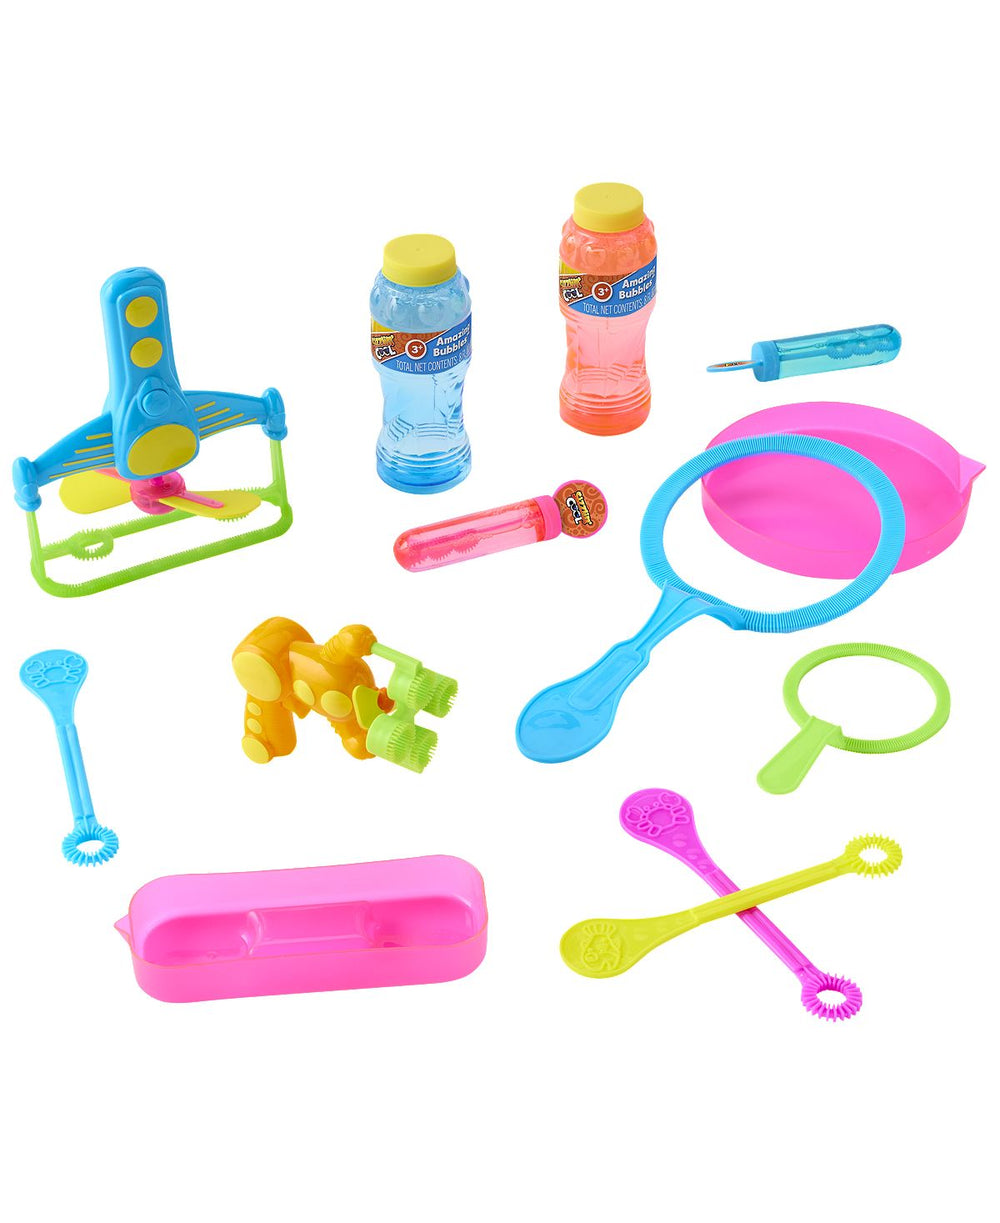 Sizzlin Cool 13-Piece Bubble Play Set with Light-Up Blower and Giant Wands